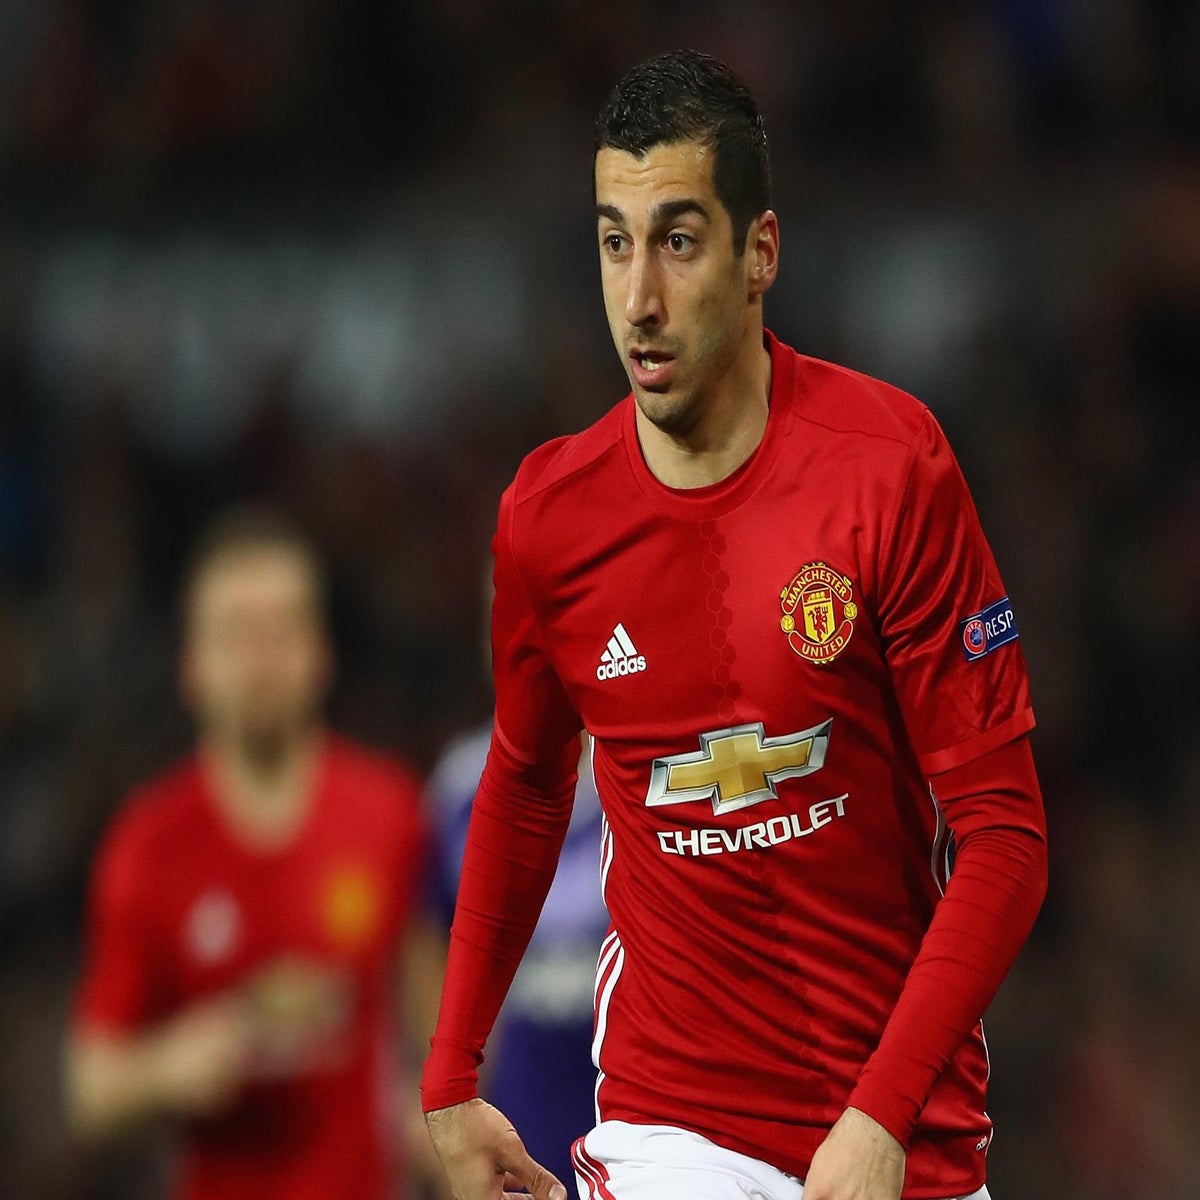 Manchester United's Henrikh Mkhitaryan keen to improve to keep starting  place, Football News